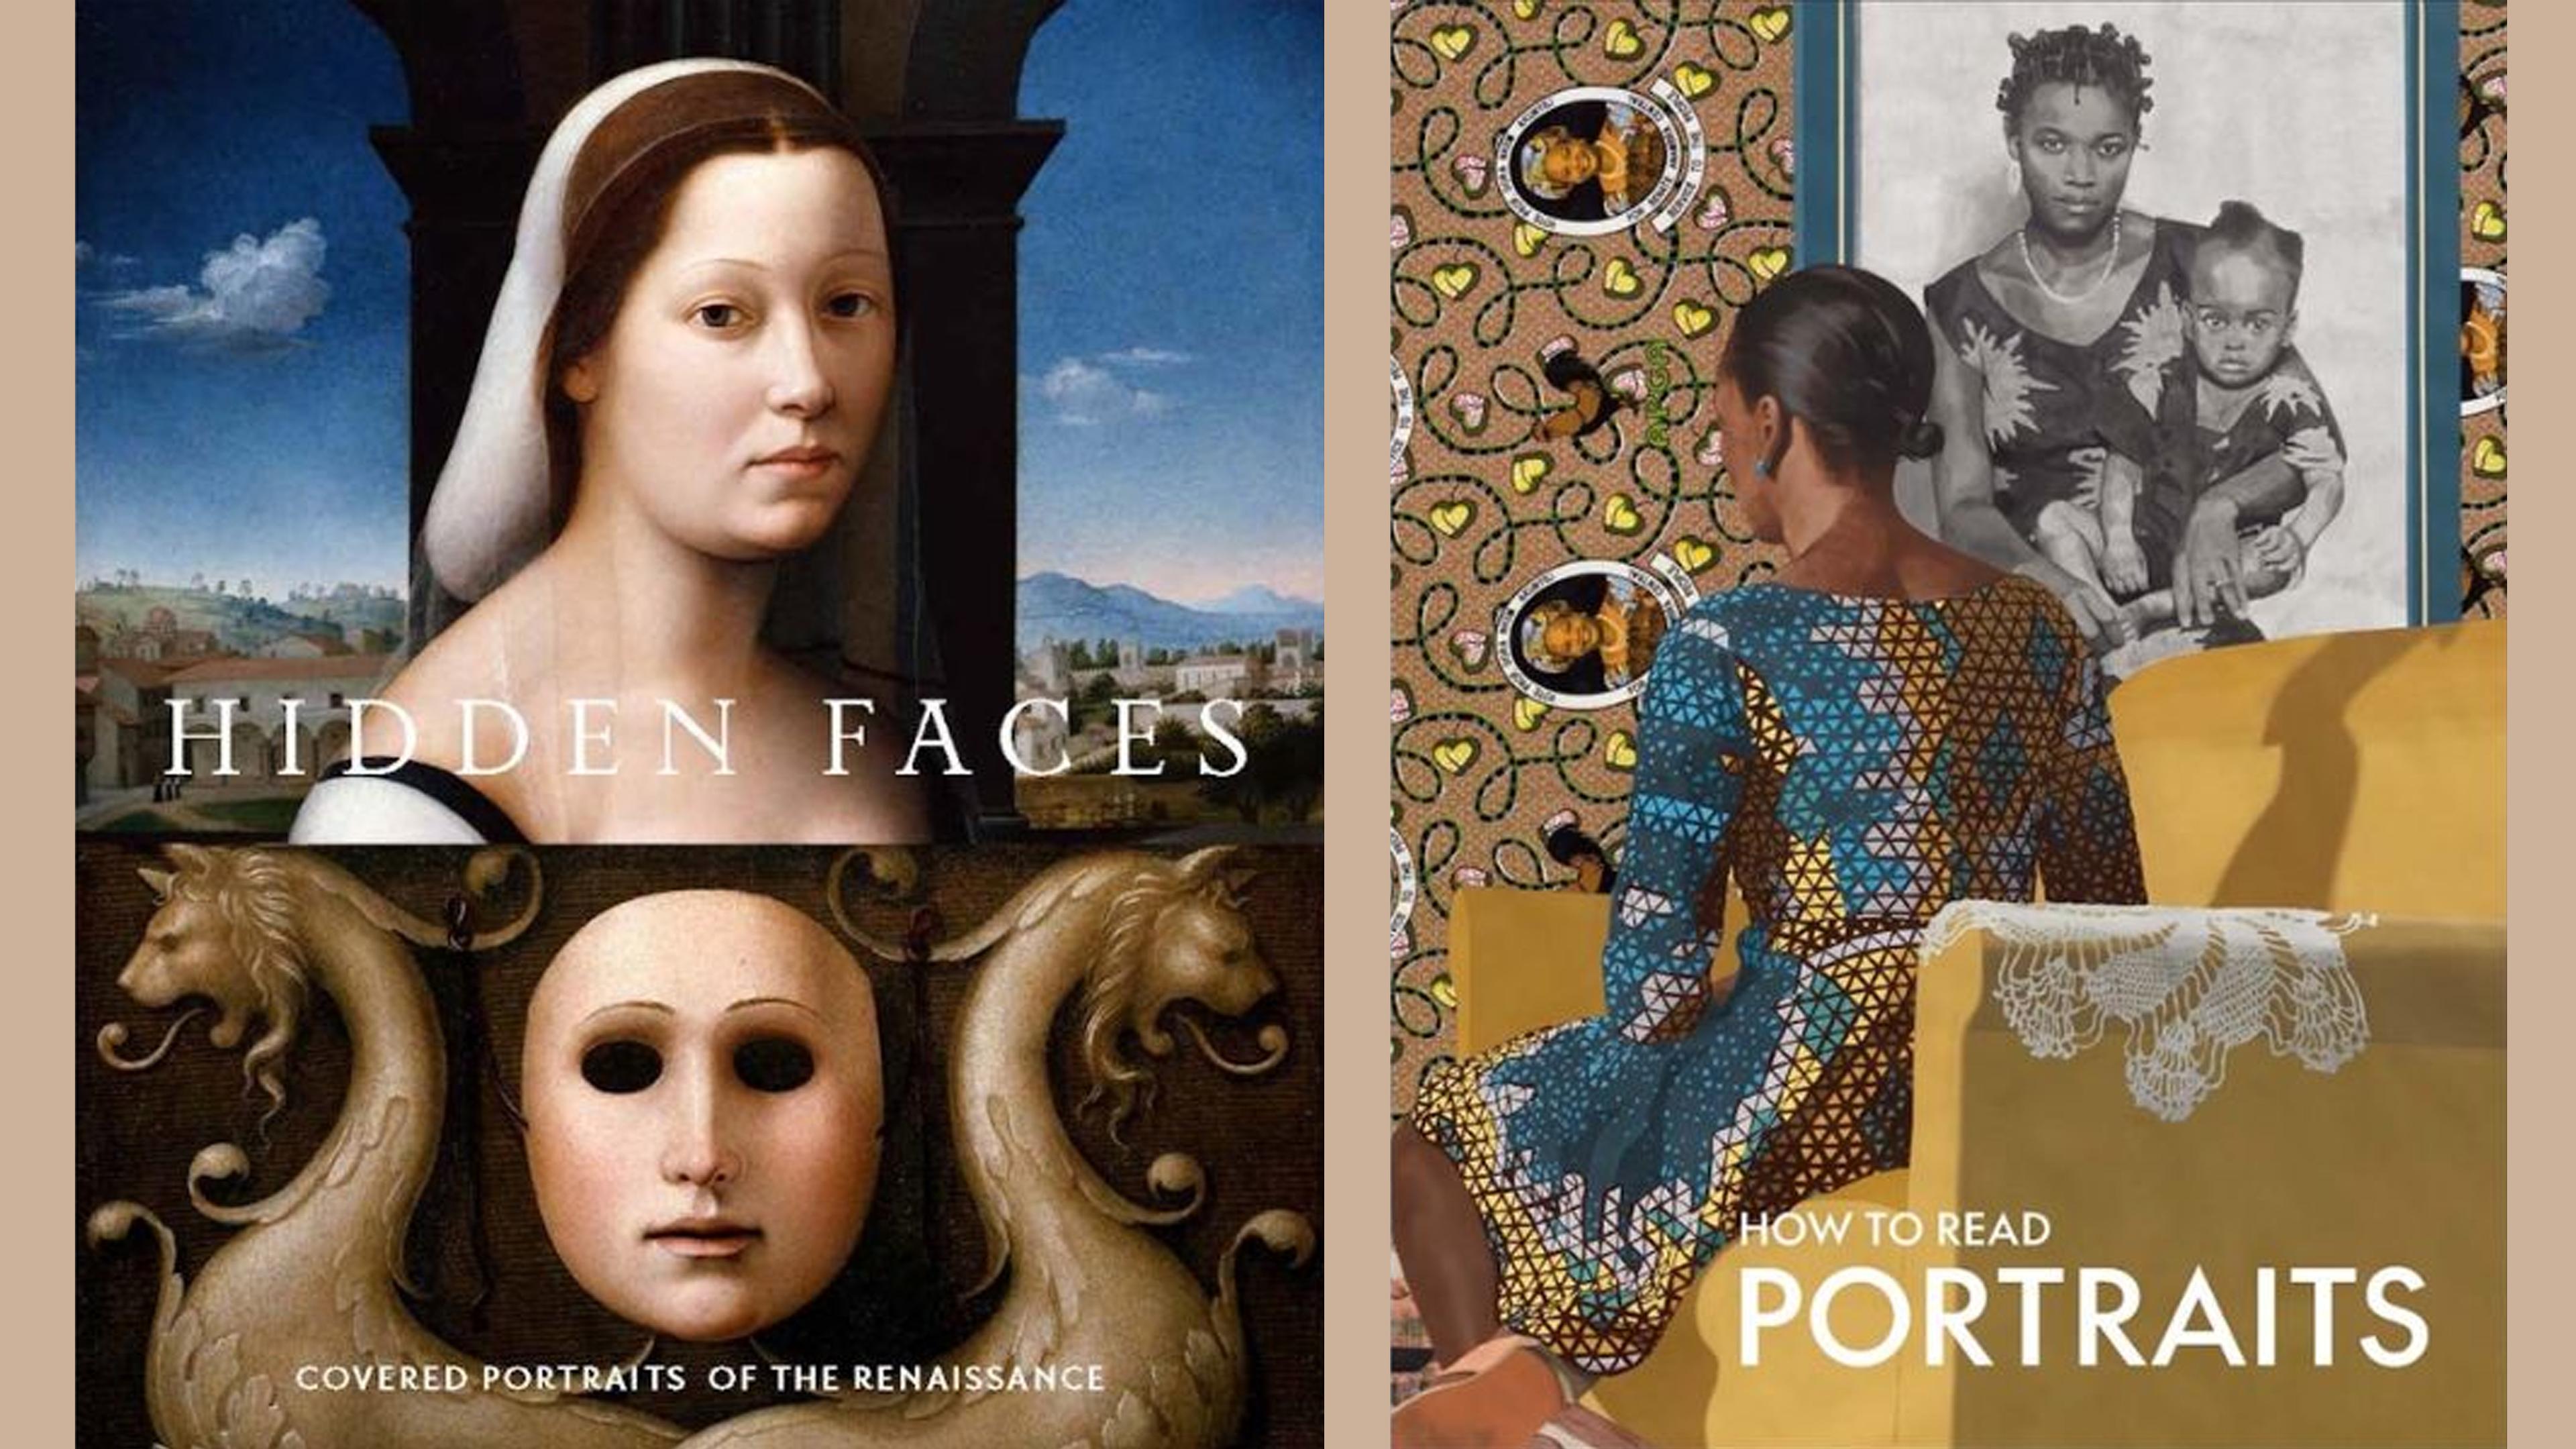 Covers of Hidden Faces: Covered Portraits of the Renaissance and How to Read Portraits.